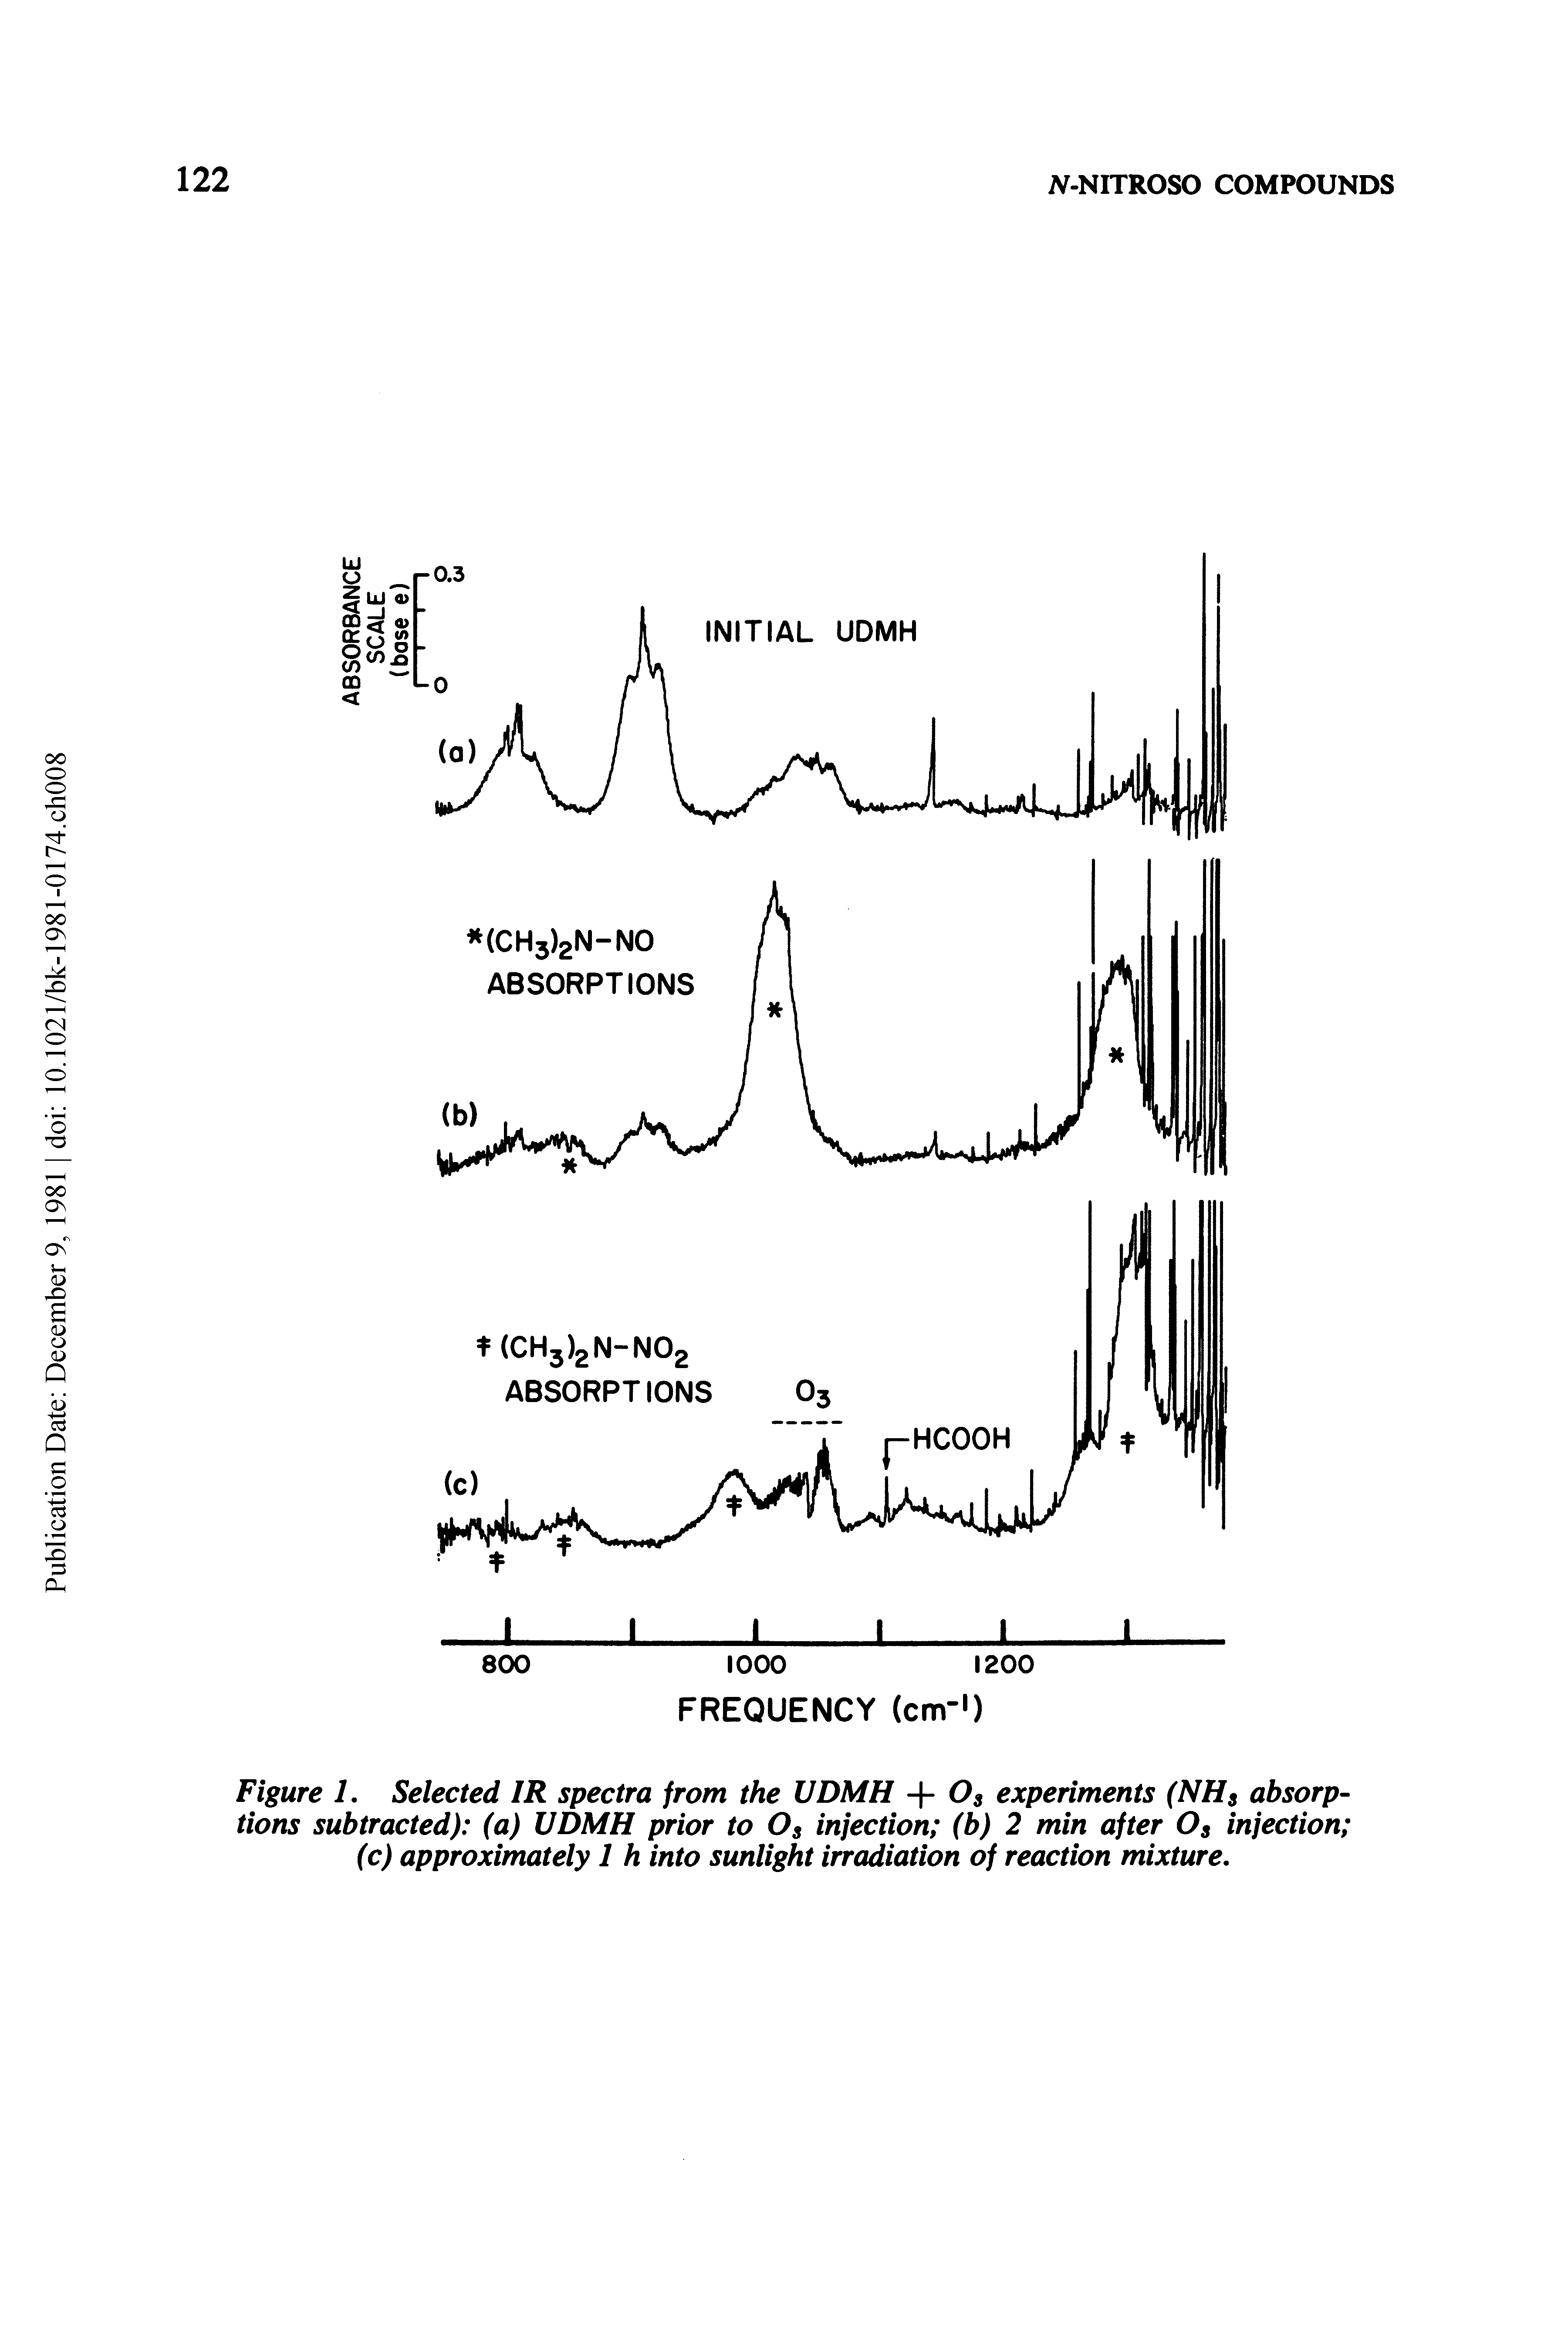 Figure L Selected IR spectra from the UDMH + Os experiments (NHs absorptions subtracted) (a) UDMH prior to Os injection (b) 2 min after Os injection (c) approximately 1 h into sunlight irradiation of reaction mixture.